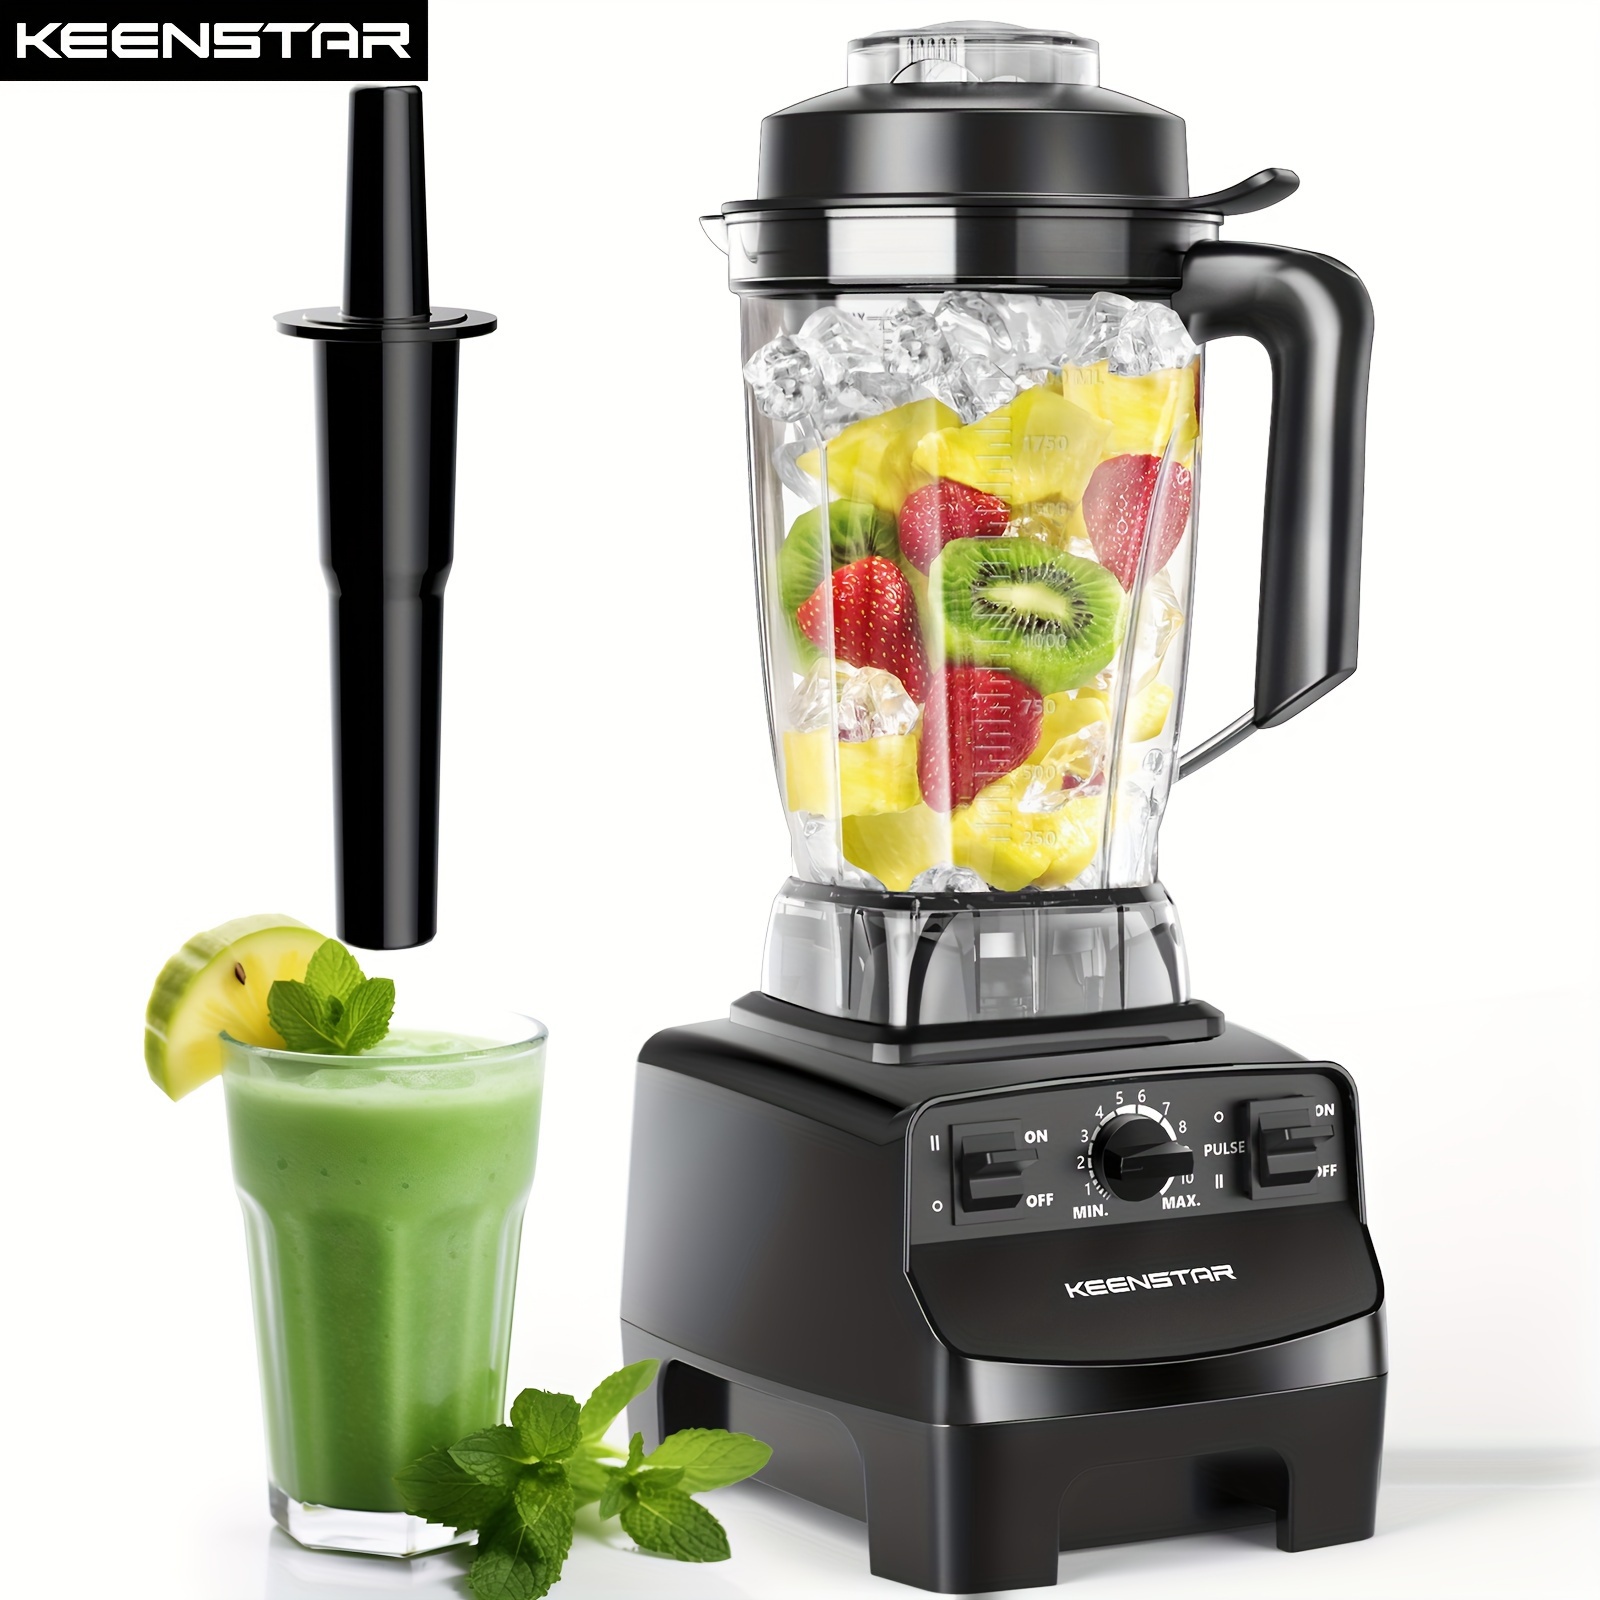 

Blenders For Kitchen, Professional 1450w Countertop Blender For Crush Ice, 68oz Blender For Smoothies, 10 Speed Control, Bpa-free Container, 8 Titanium Stainless Steel Blade For Fruit, Veggies